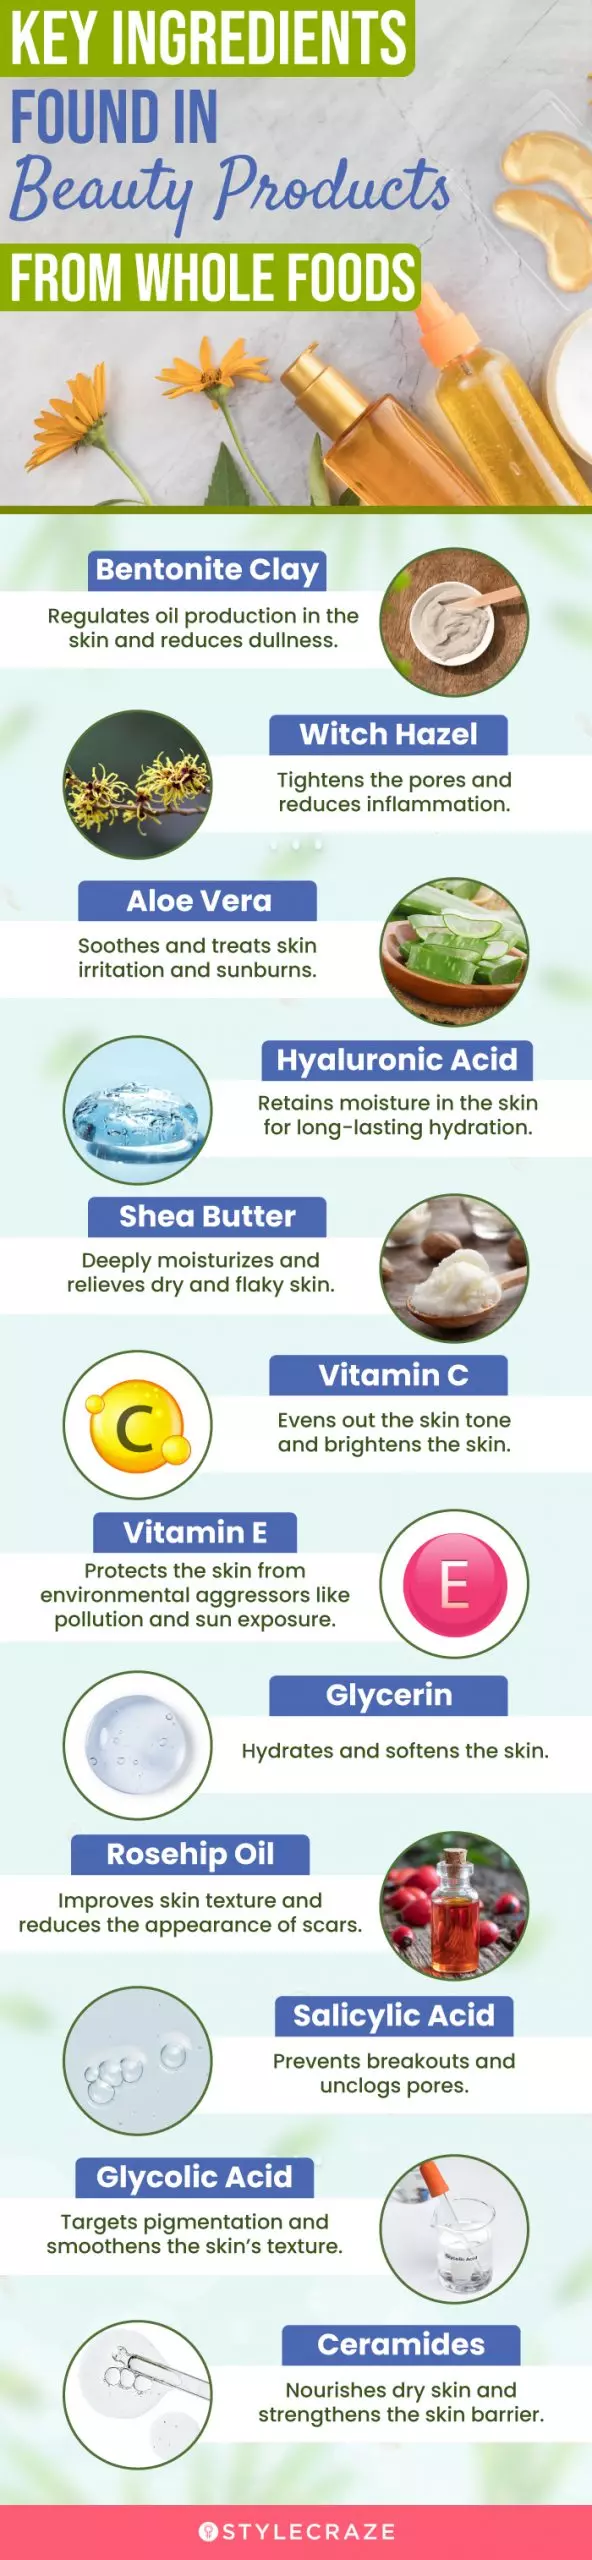 Key Ingredients Found In Beauty Products From Whole Foods (infographic)